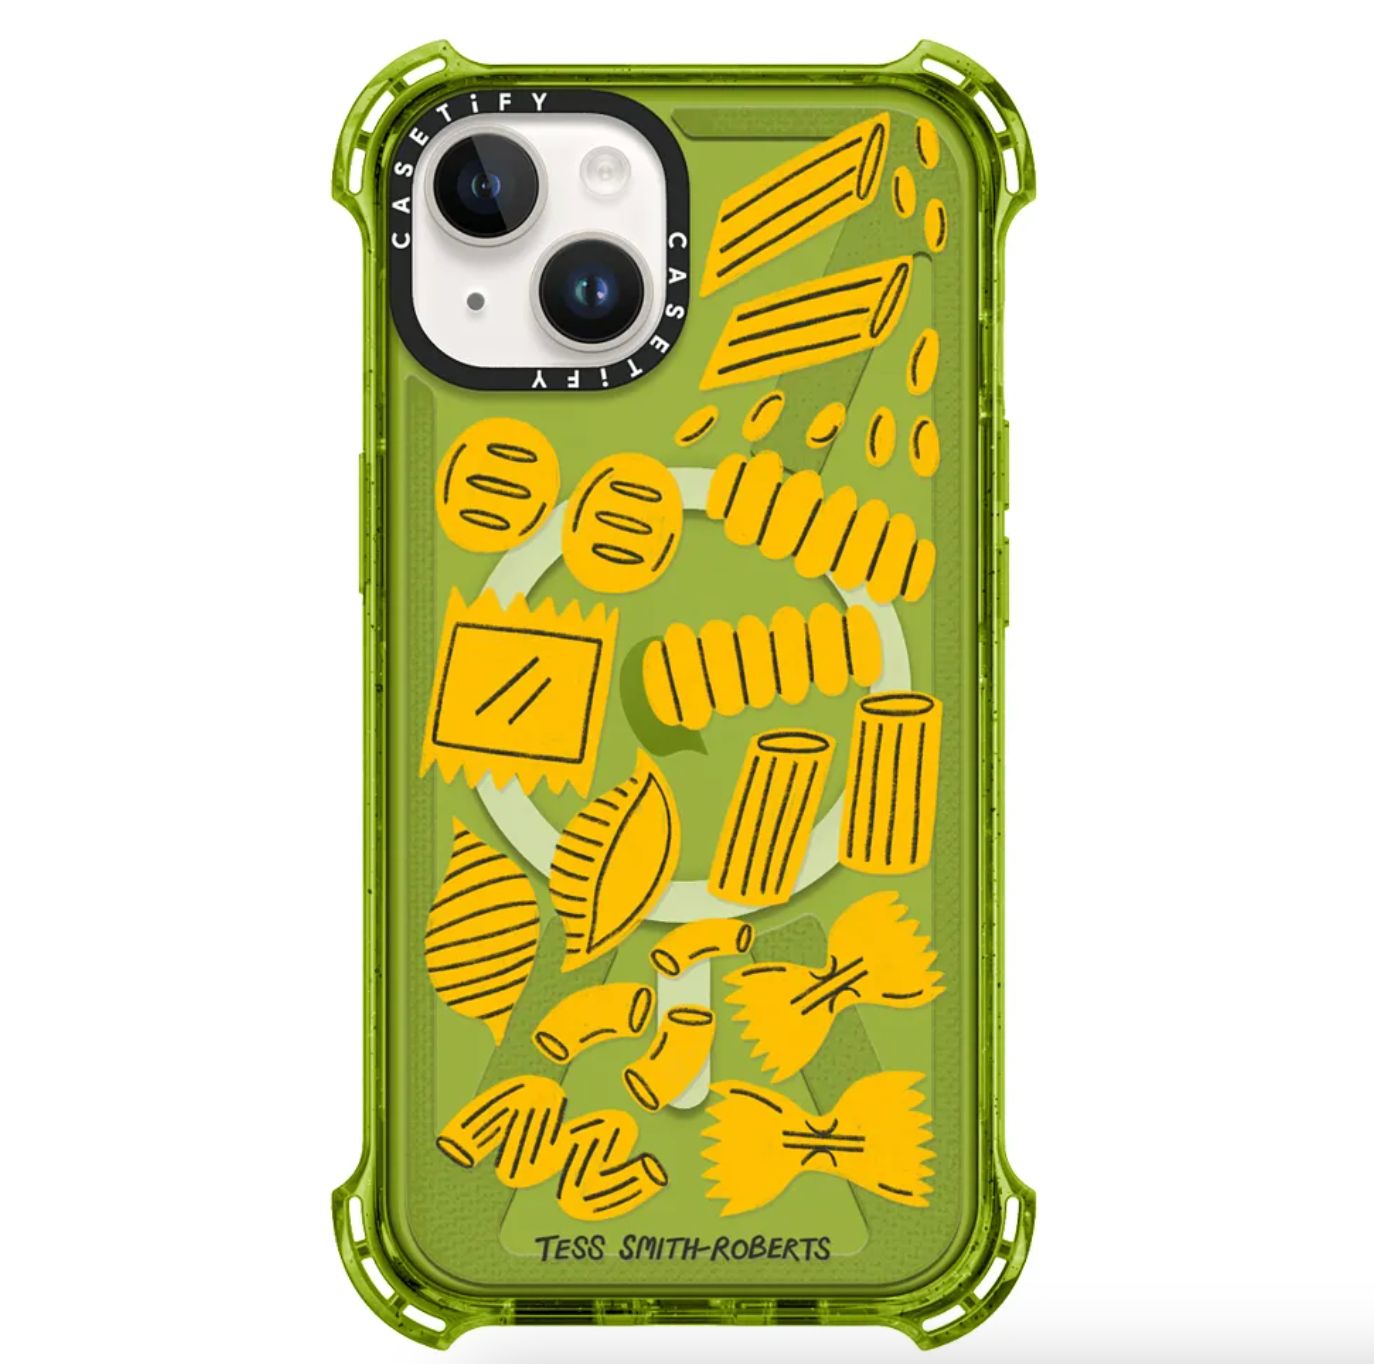 A Casetify phone case with a macaroni print on it